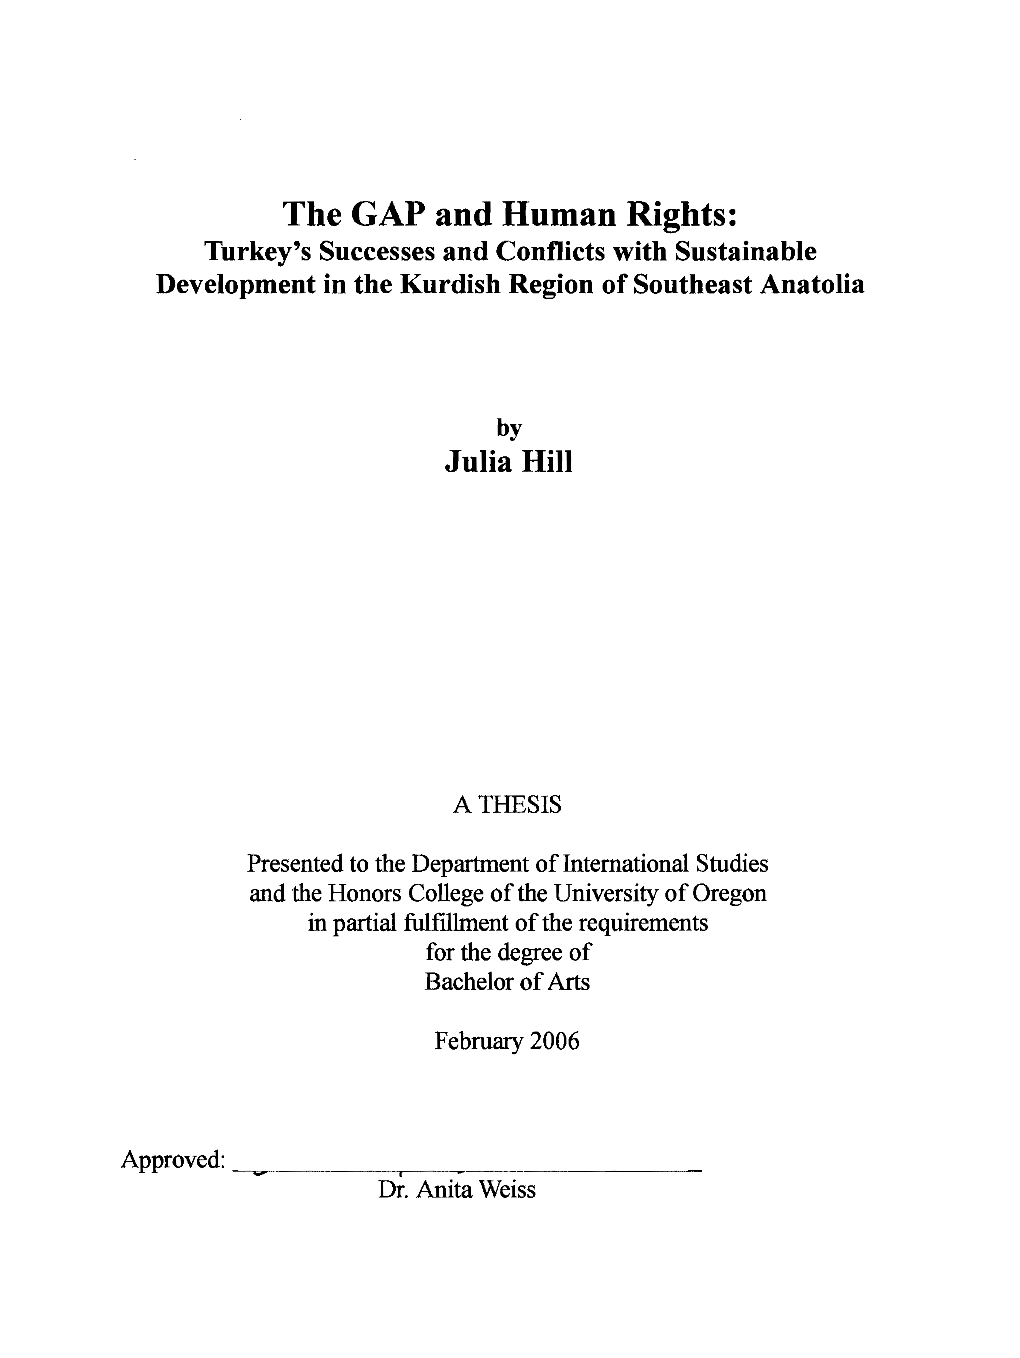 The GAP and Human Rights: Turkey's Successes and Conflicts with Sustainable Development in the Kurdish Region Ofsoutheast Anatolia